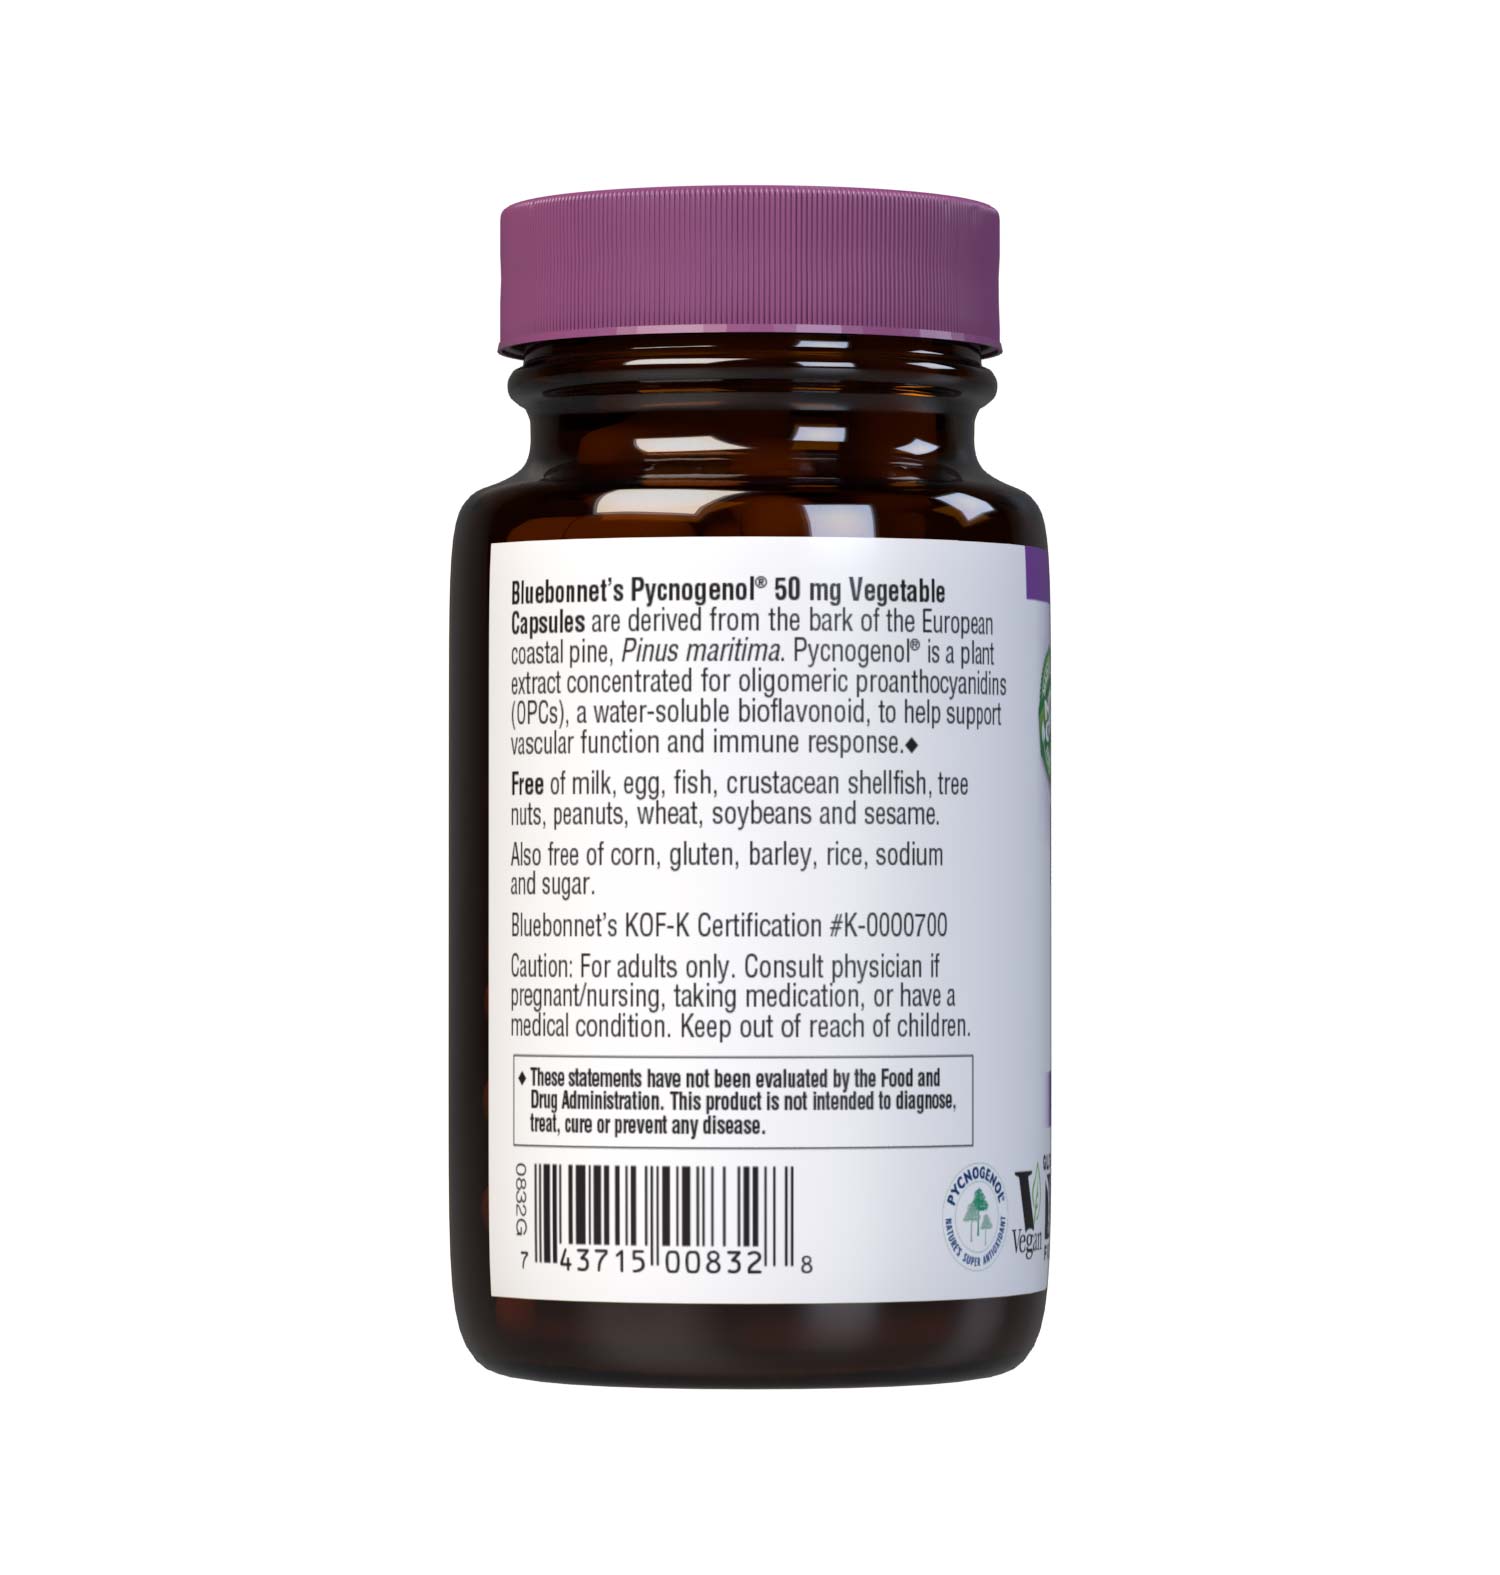 Bluebonnet’s Pycnogenol 50 mg 30 Vegetable Capsules are derived from the bark of the European coastal pine, Pinus maritima. Pycnogenol is a plant extract concentrated in oligomeric proanthocyanidins (OPCs), a water-soluble bioflavonoid. Pycnogenol may help support vascular function and immune response. Description panel. #size_30 count